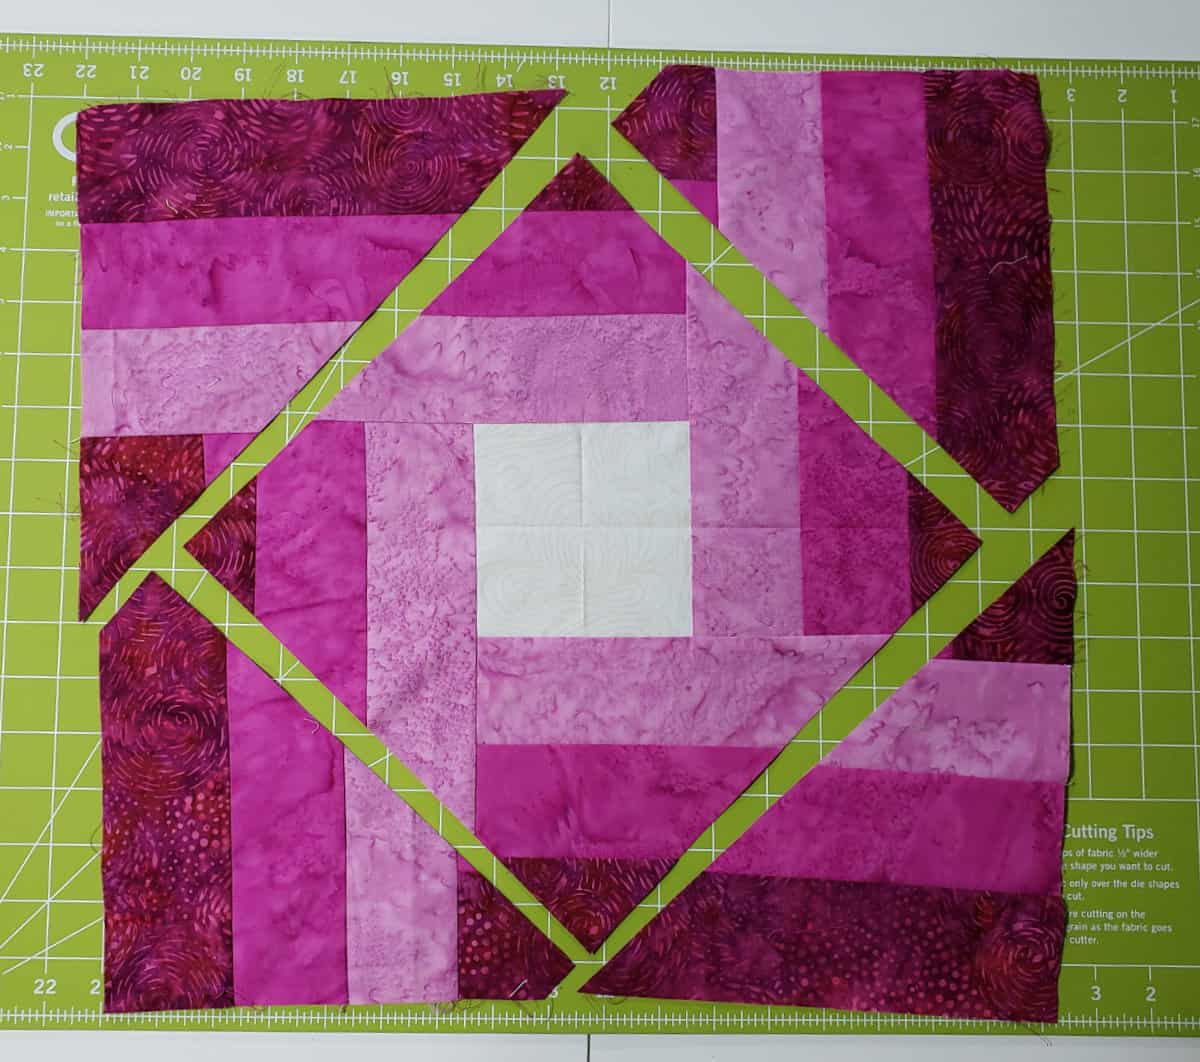 Trim all four sides of quilt block